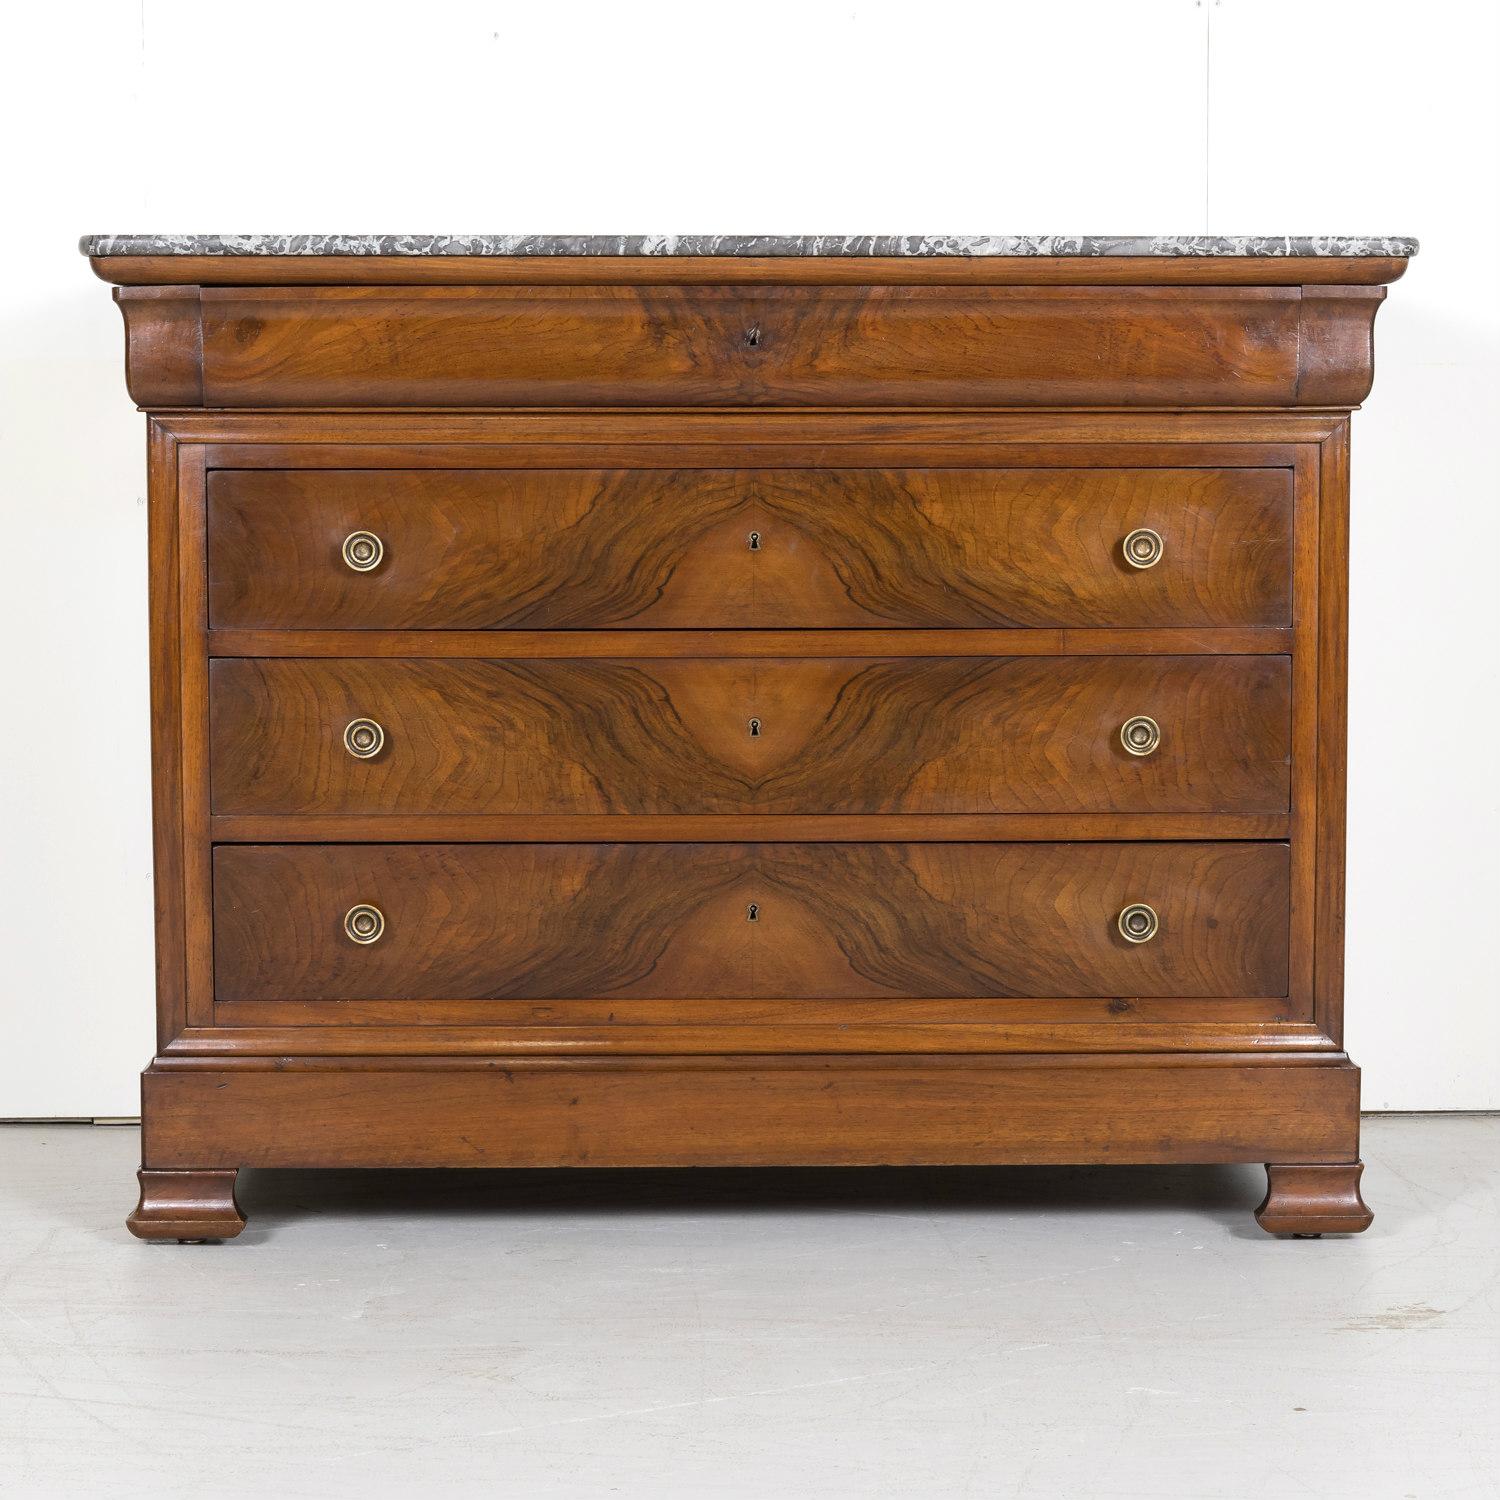 A four-drawer 19th century French Louis Philippe period commode handcrafted in walnut by talented artisans near Rennes in the Brittany region, circa 1840s. Having a bookmatched burled walnut front, this handsome commode features its original Saint